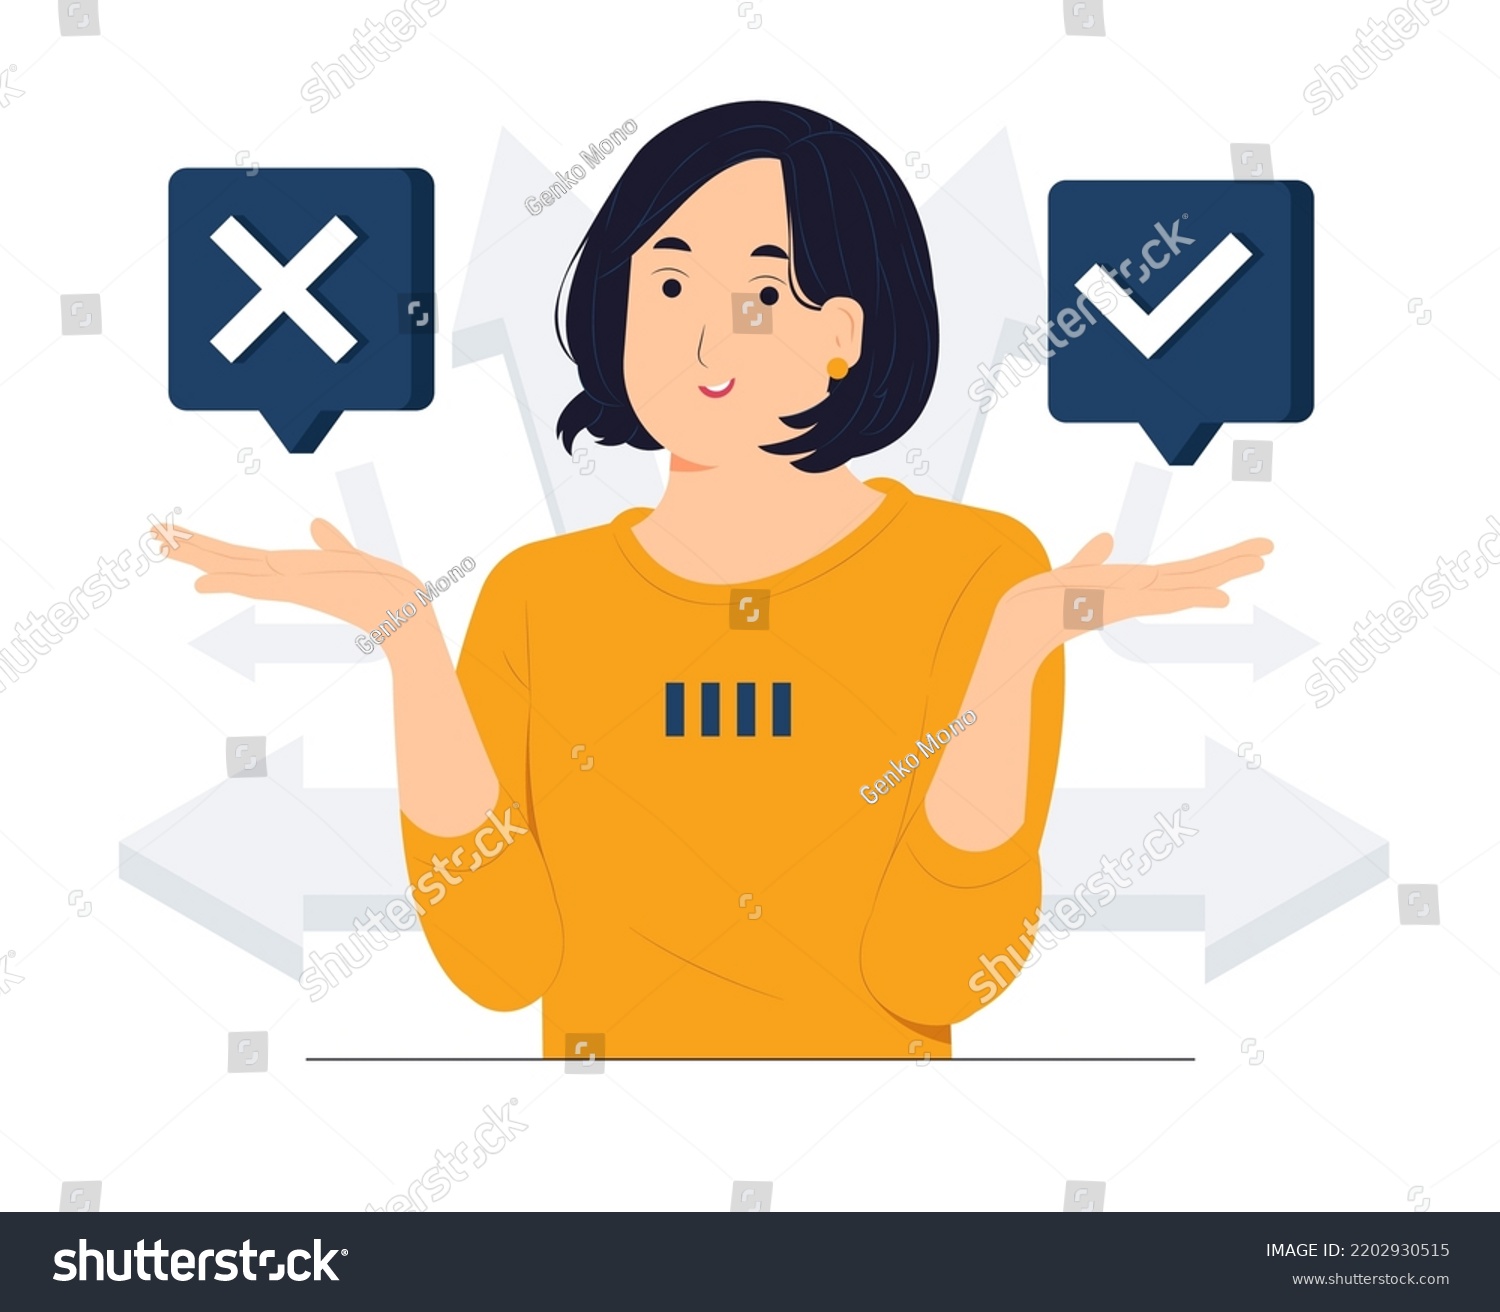 Decision between right or left, yes or no, Business decisions, ethical dilemma, choose, choice, undecided, and feeling confused concept illustration #2202930515